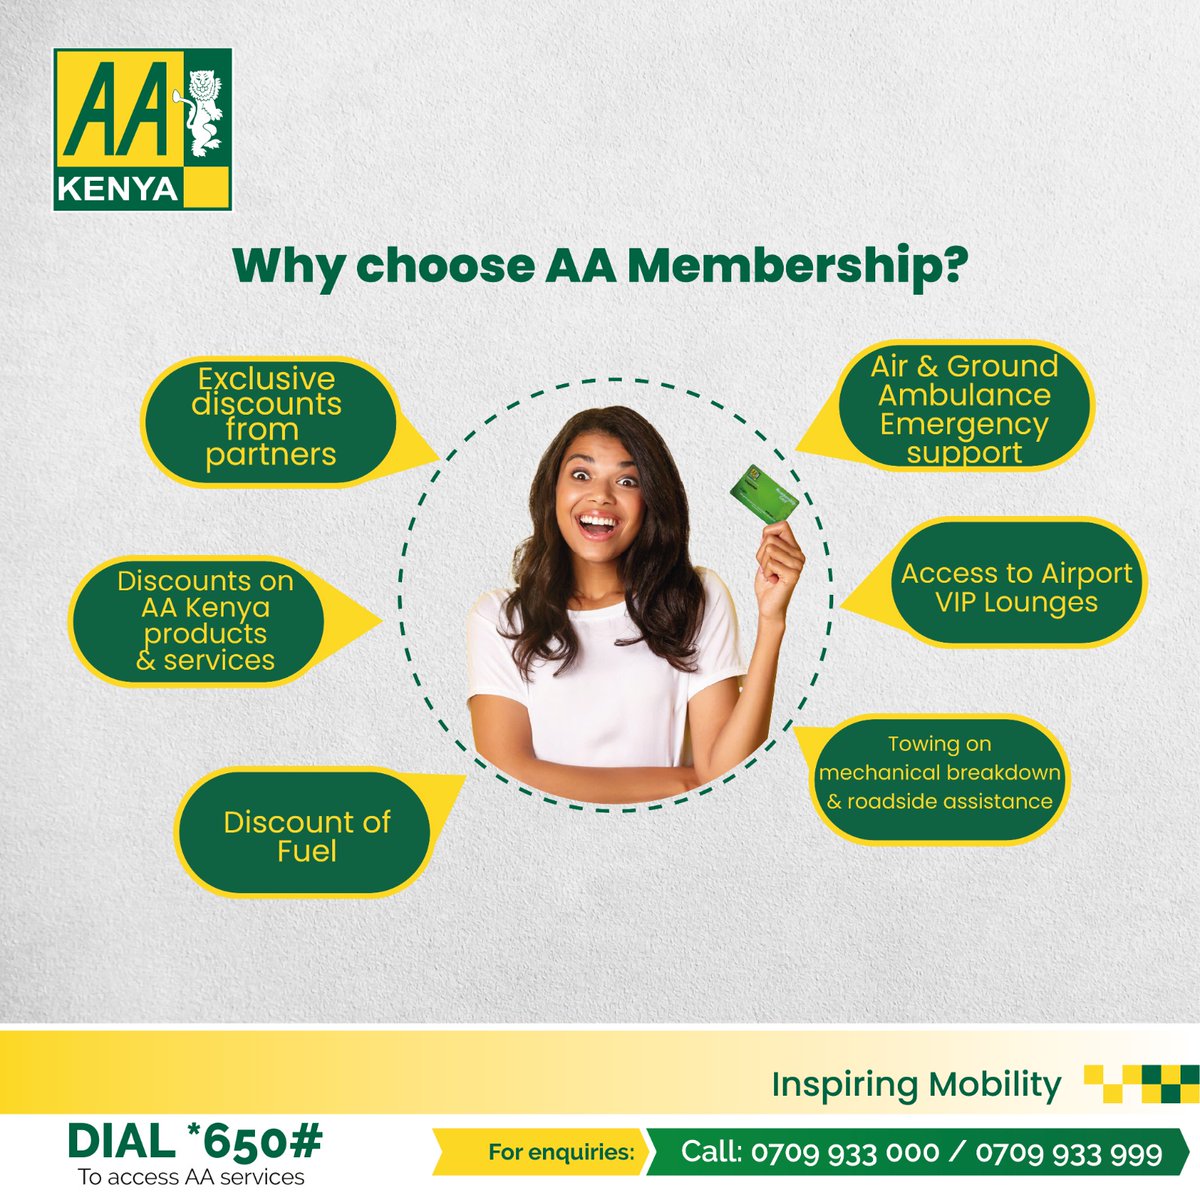 Be part of the AA Kenya family! With more than nine membership categories, there is one made just for you. Enjoy free access to airport lounges, fuel discounts, towing services, unlimited roadside assistance, Air & Ground ambulance emergency support and much more. For more info,